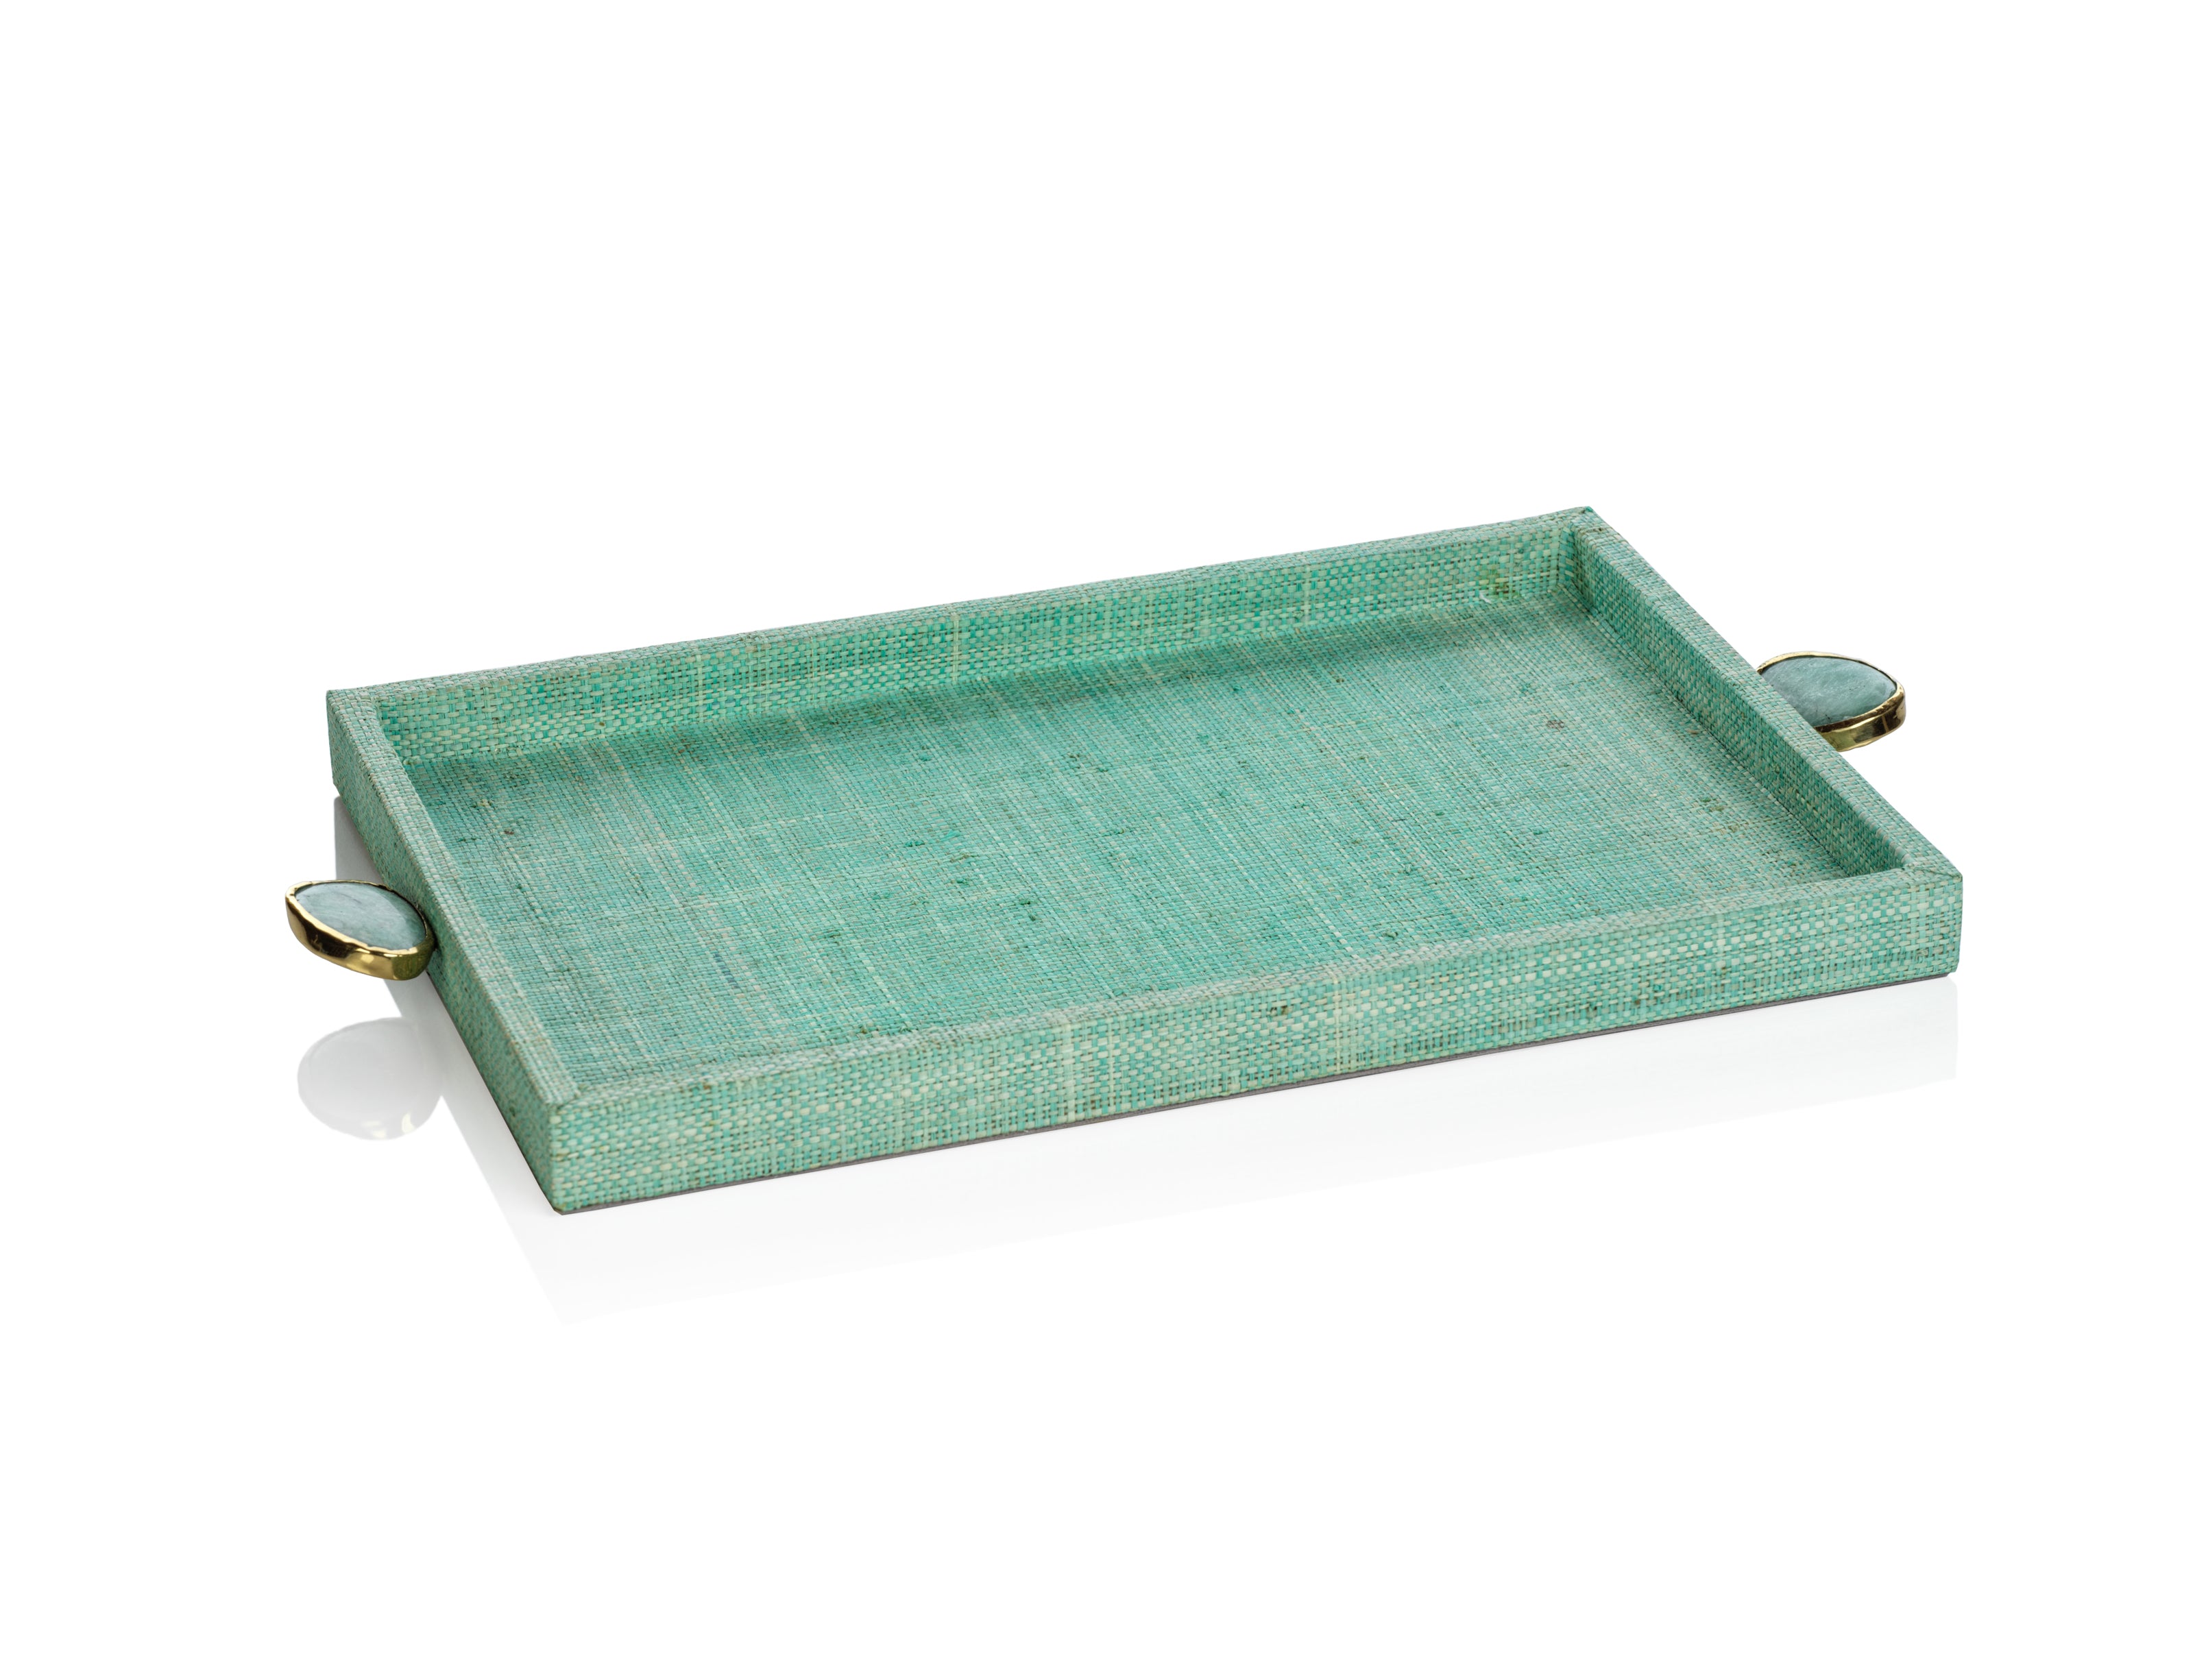 Raffia Palm Tray with Stone Accent - Jade - CARLYLE AVENUE